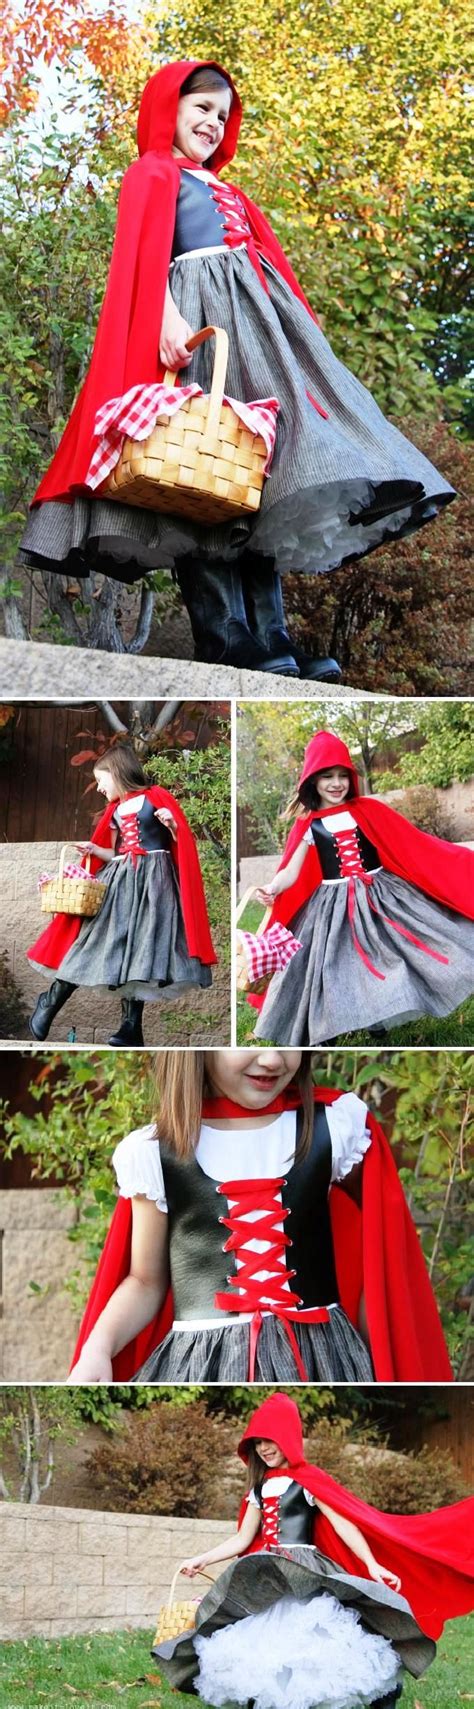 Little red riding hood art print. 10+ images about Little Red Riding Hood on Pinterest | Red riding hood, Tutu costumes and Hoods